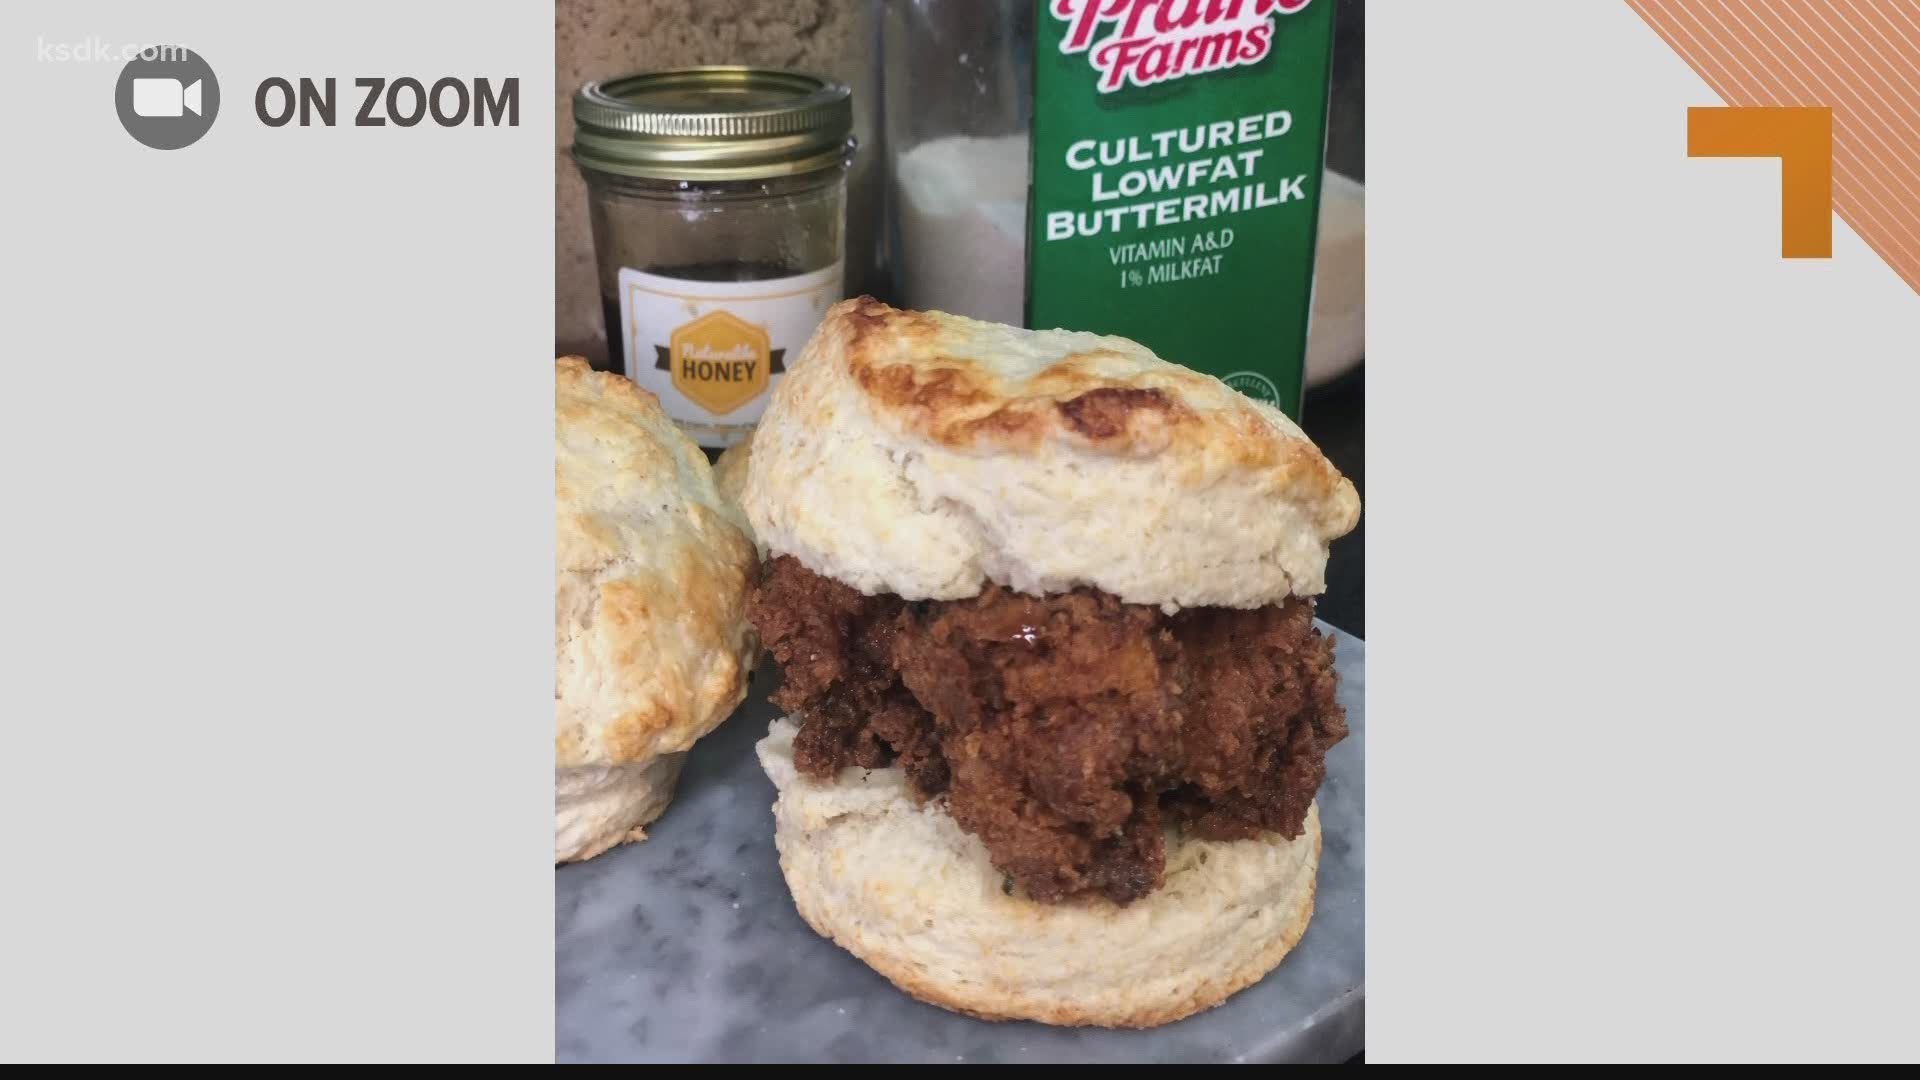 Chef Maleeka Harris of Chef Rabbit Catering shares a recipe for a chicken biscuit sandwich.